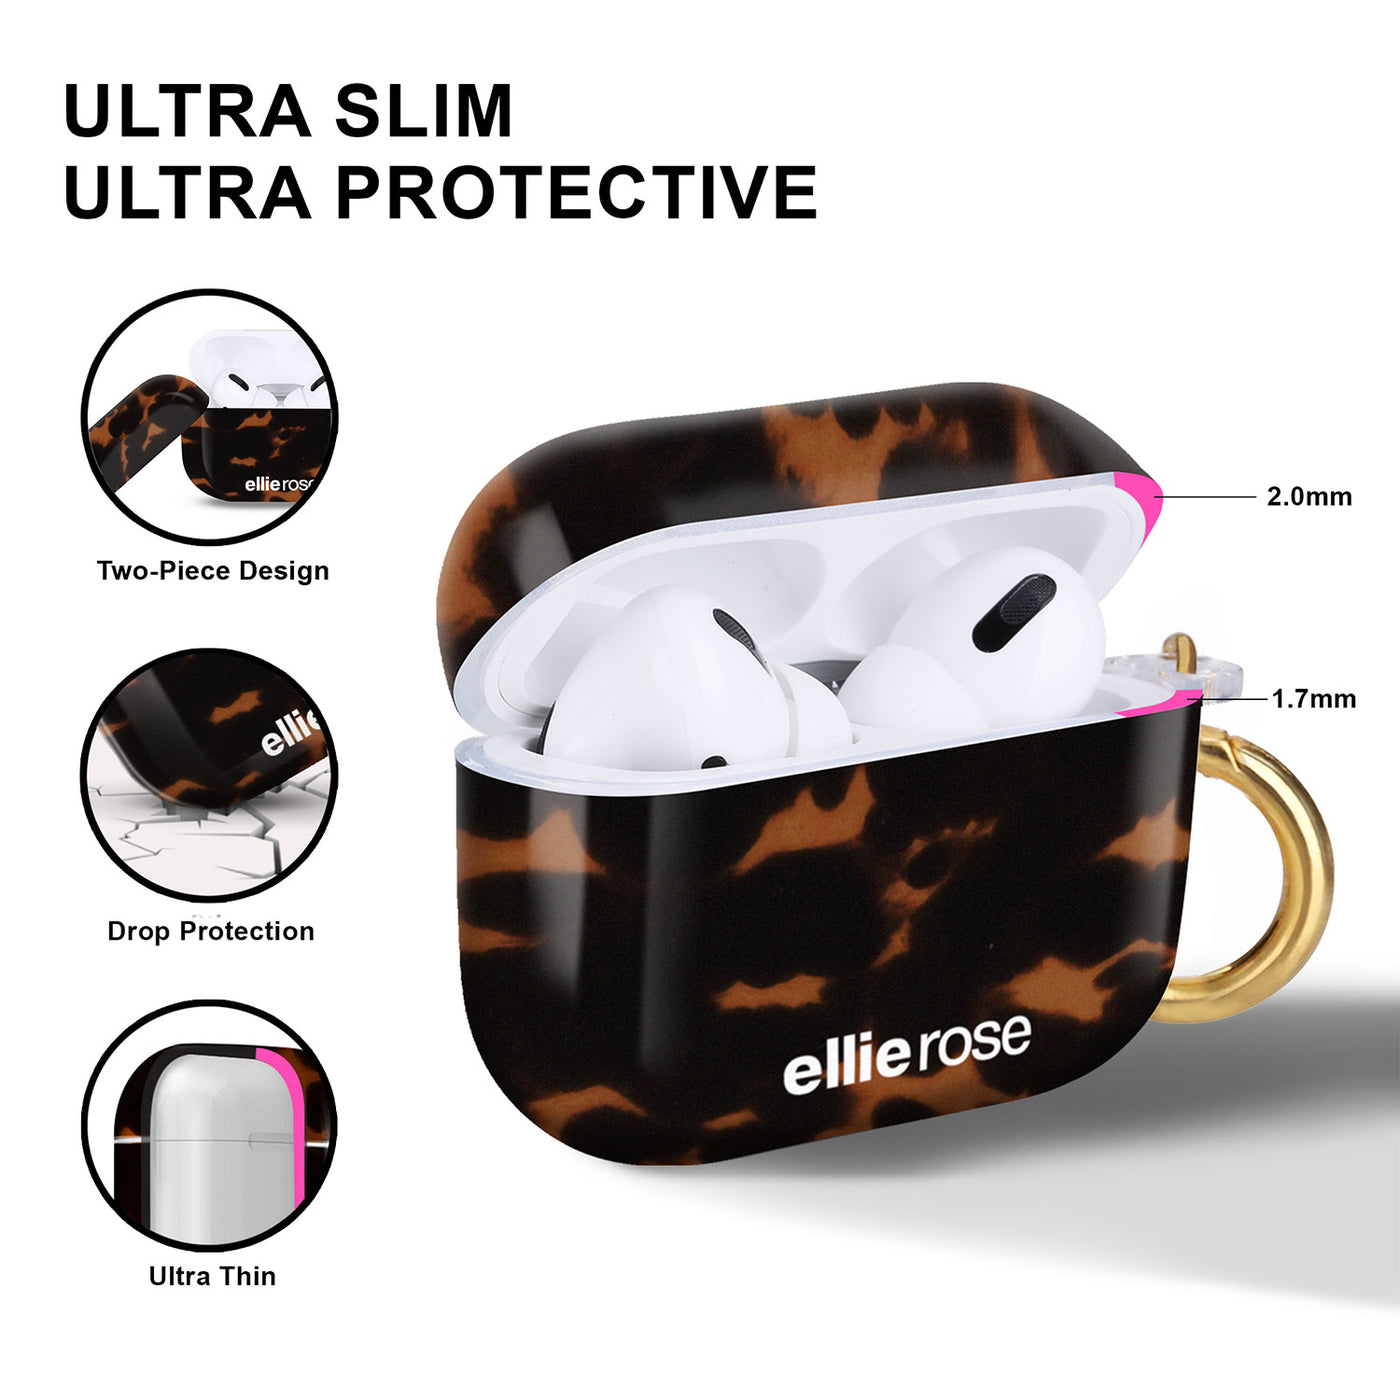 ultra slim, ultra protective, two piece design, and drop protection Tortoiseshell Airpods Pro Case